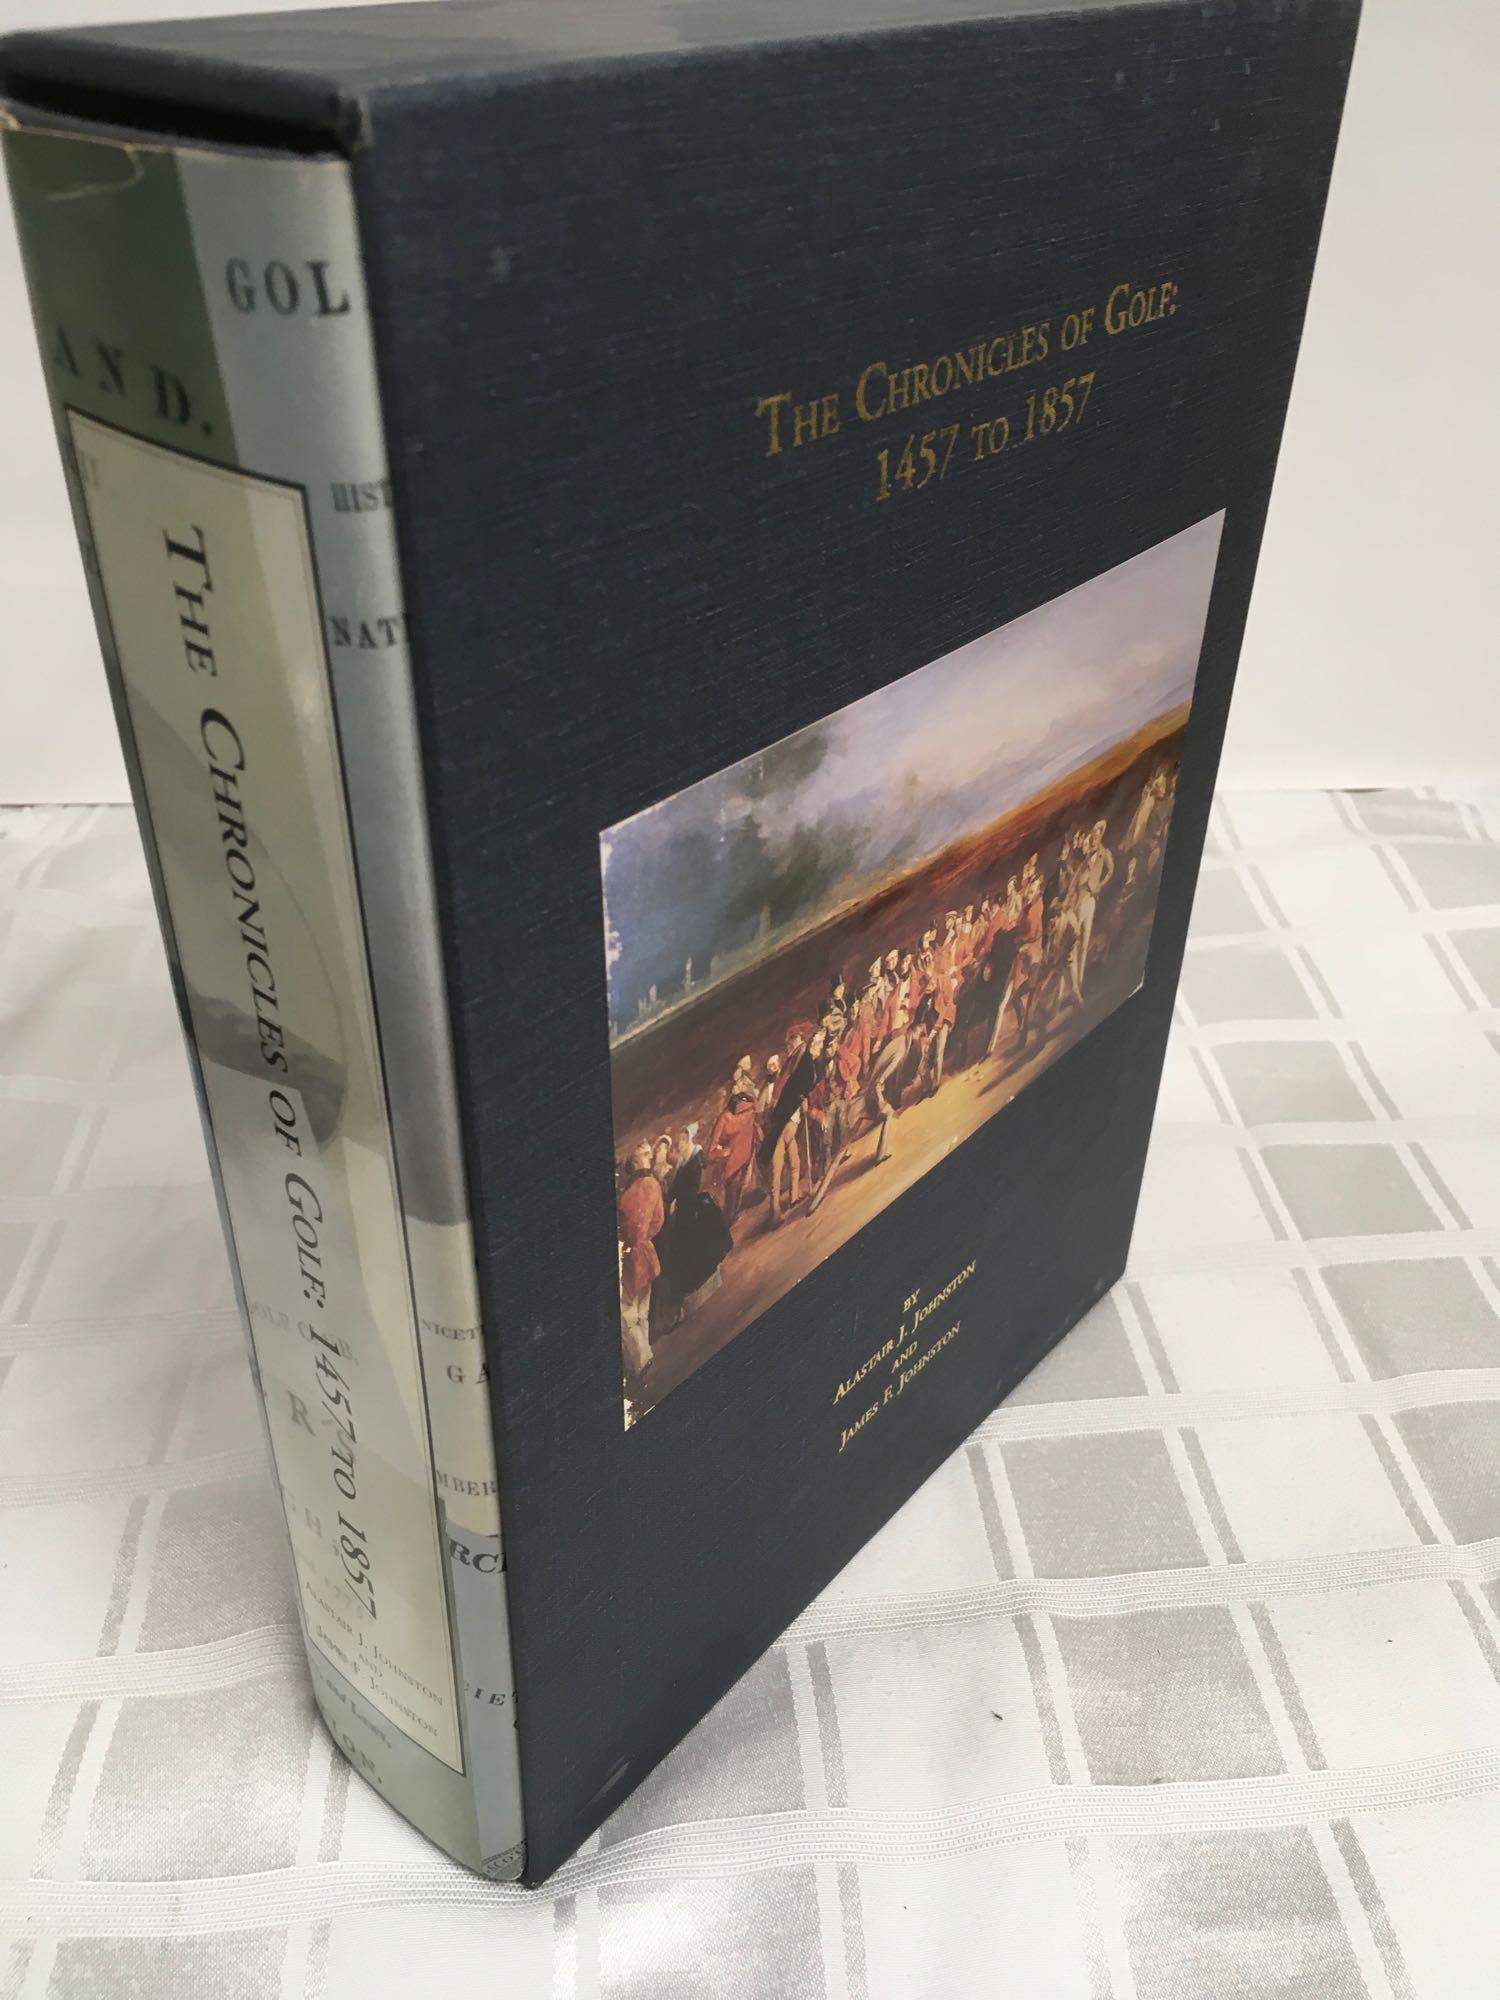 The Chronicles Of Golf 1457 to 1857 book with case. Copy number 672.